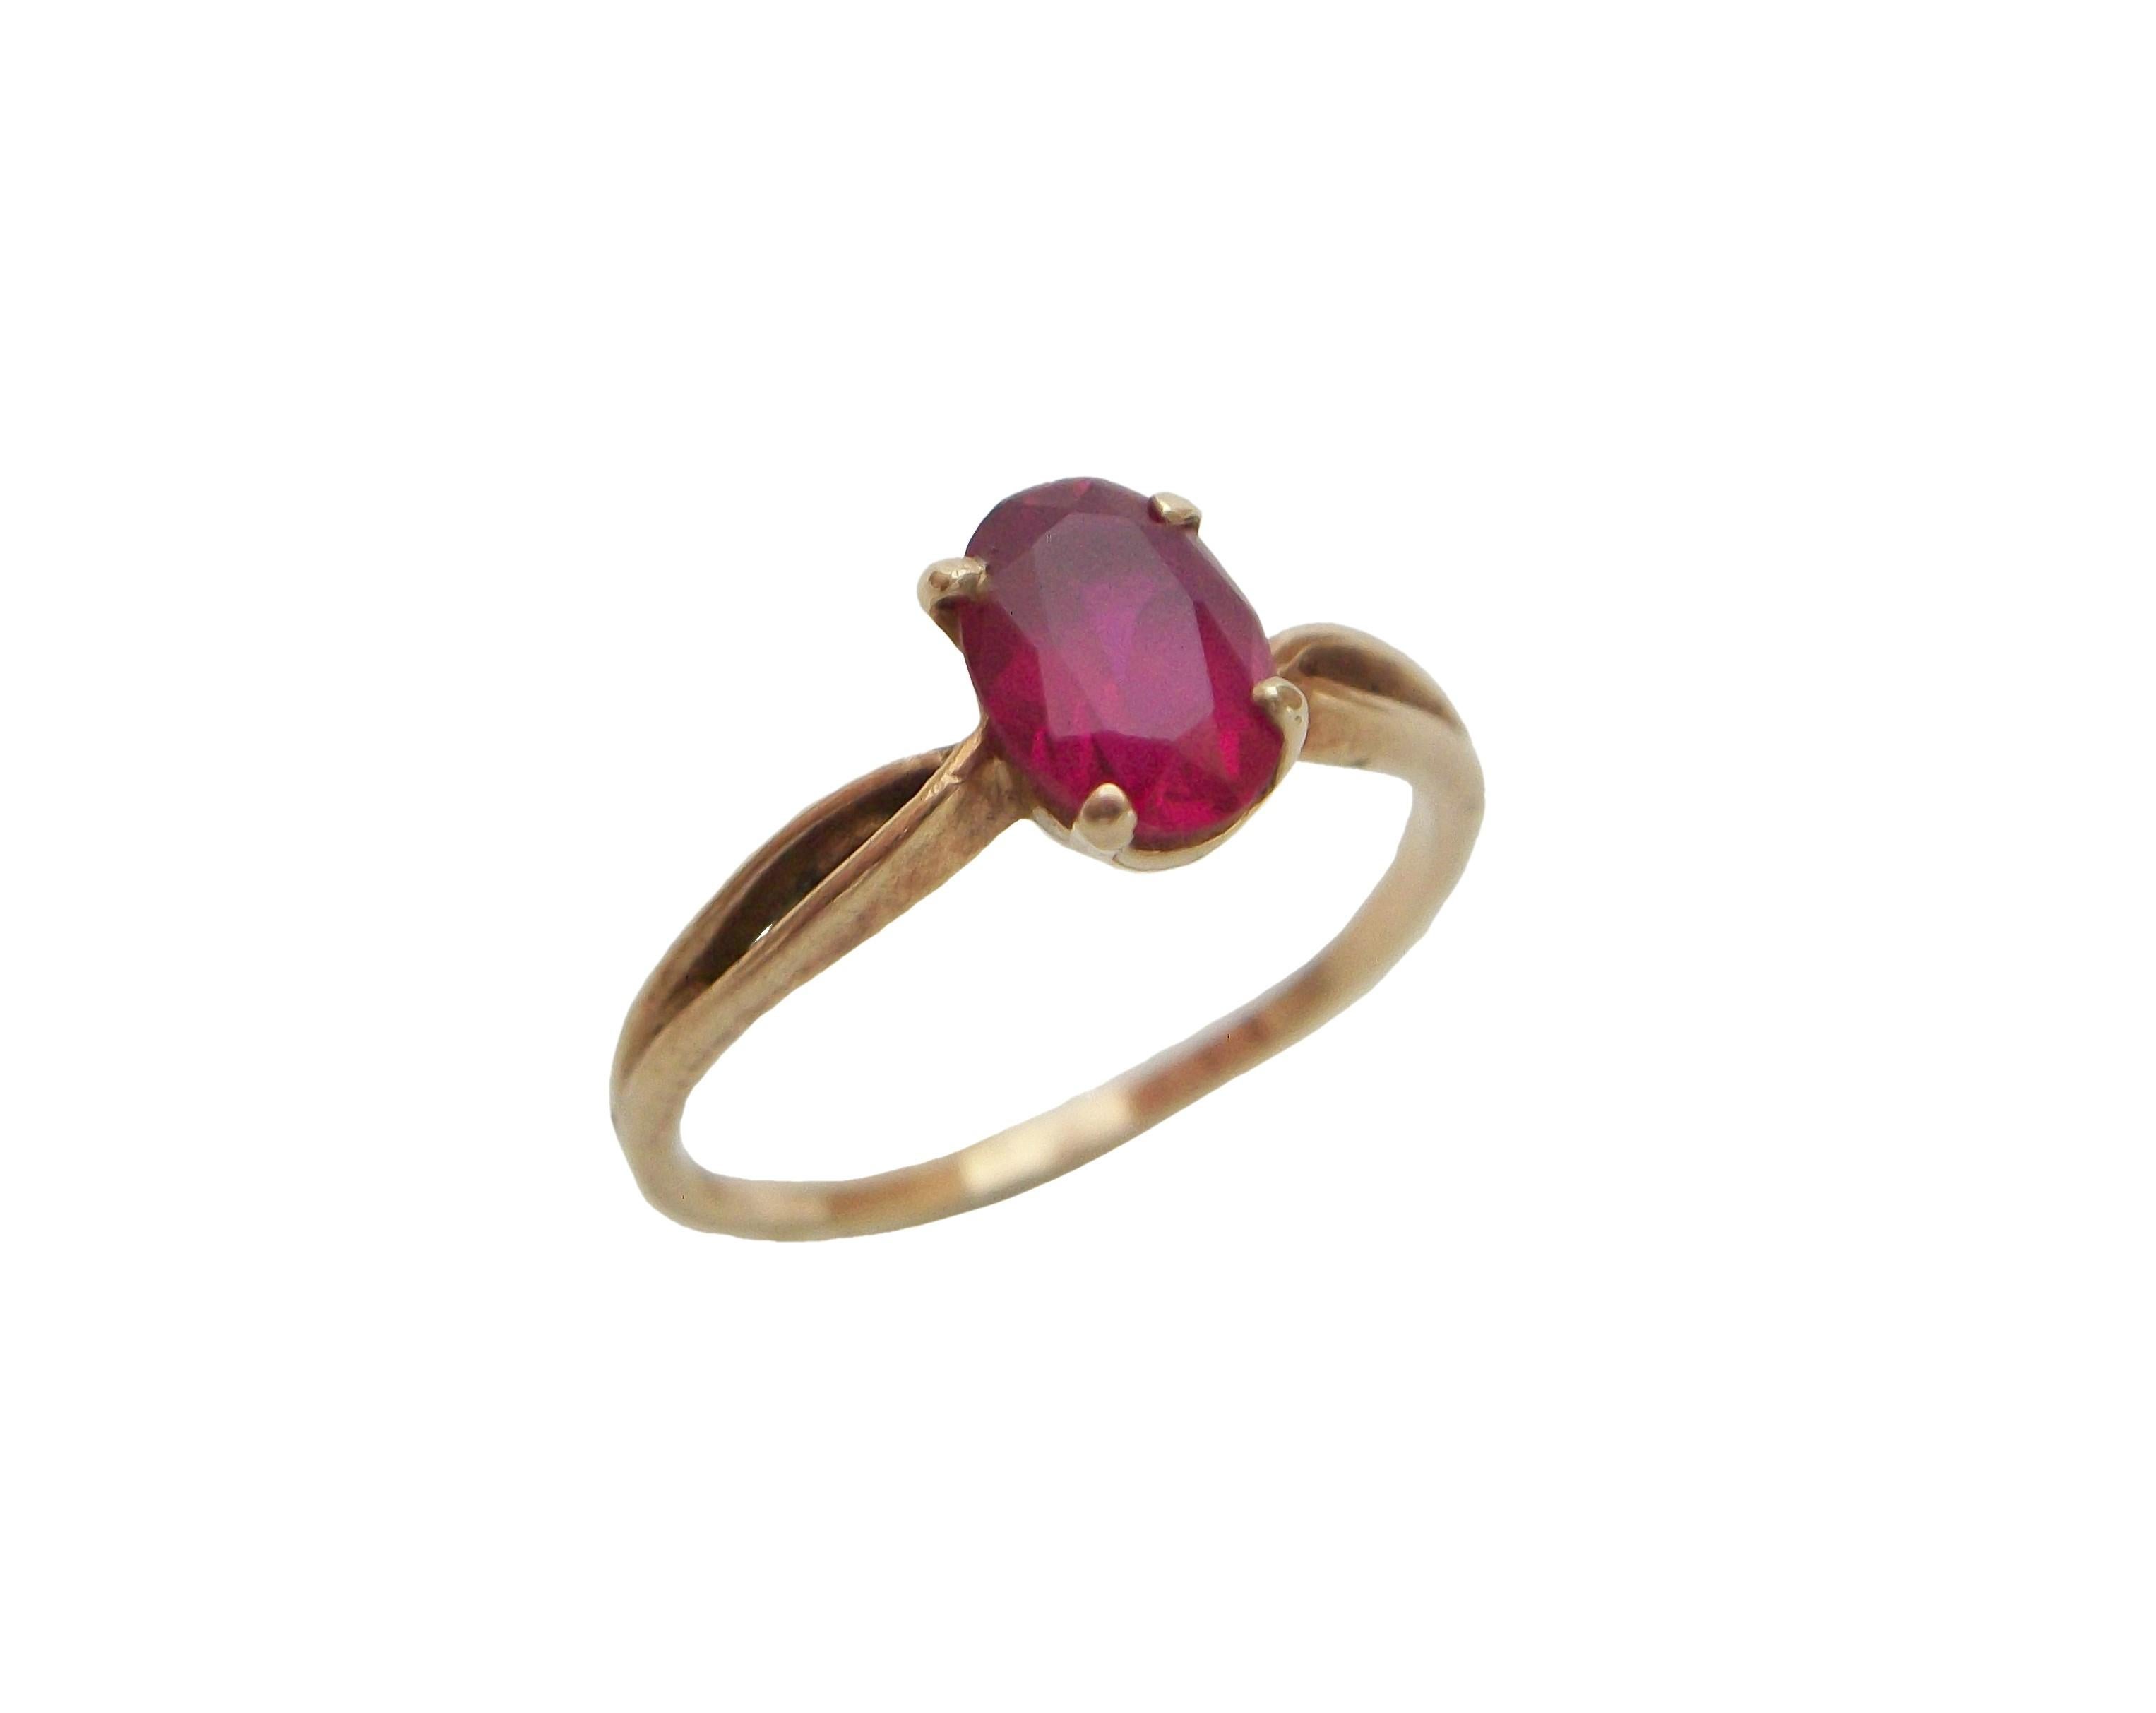 Vintage red topaz and 10K yellow gold ring - classic style - the topaz gemstone claw set (approximately 1 carat weight - oval faceted cut - 7 x 5 x 4 mm.) -10K to the interior of the band (as photographed) - signed (BTA? - worn mark -